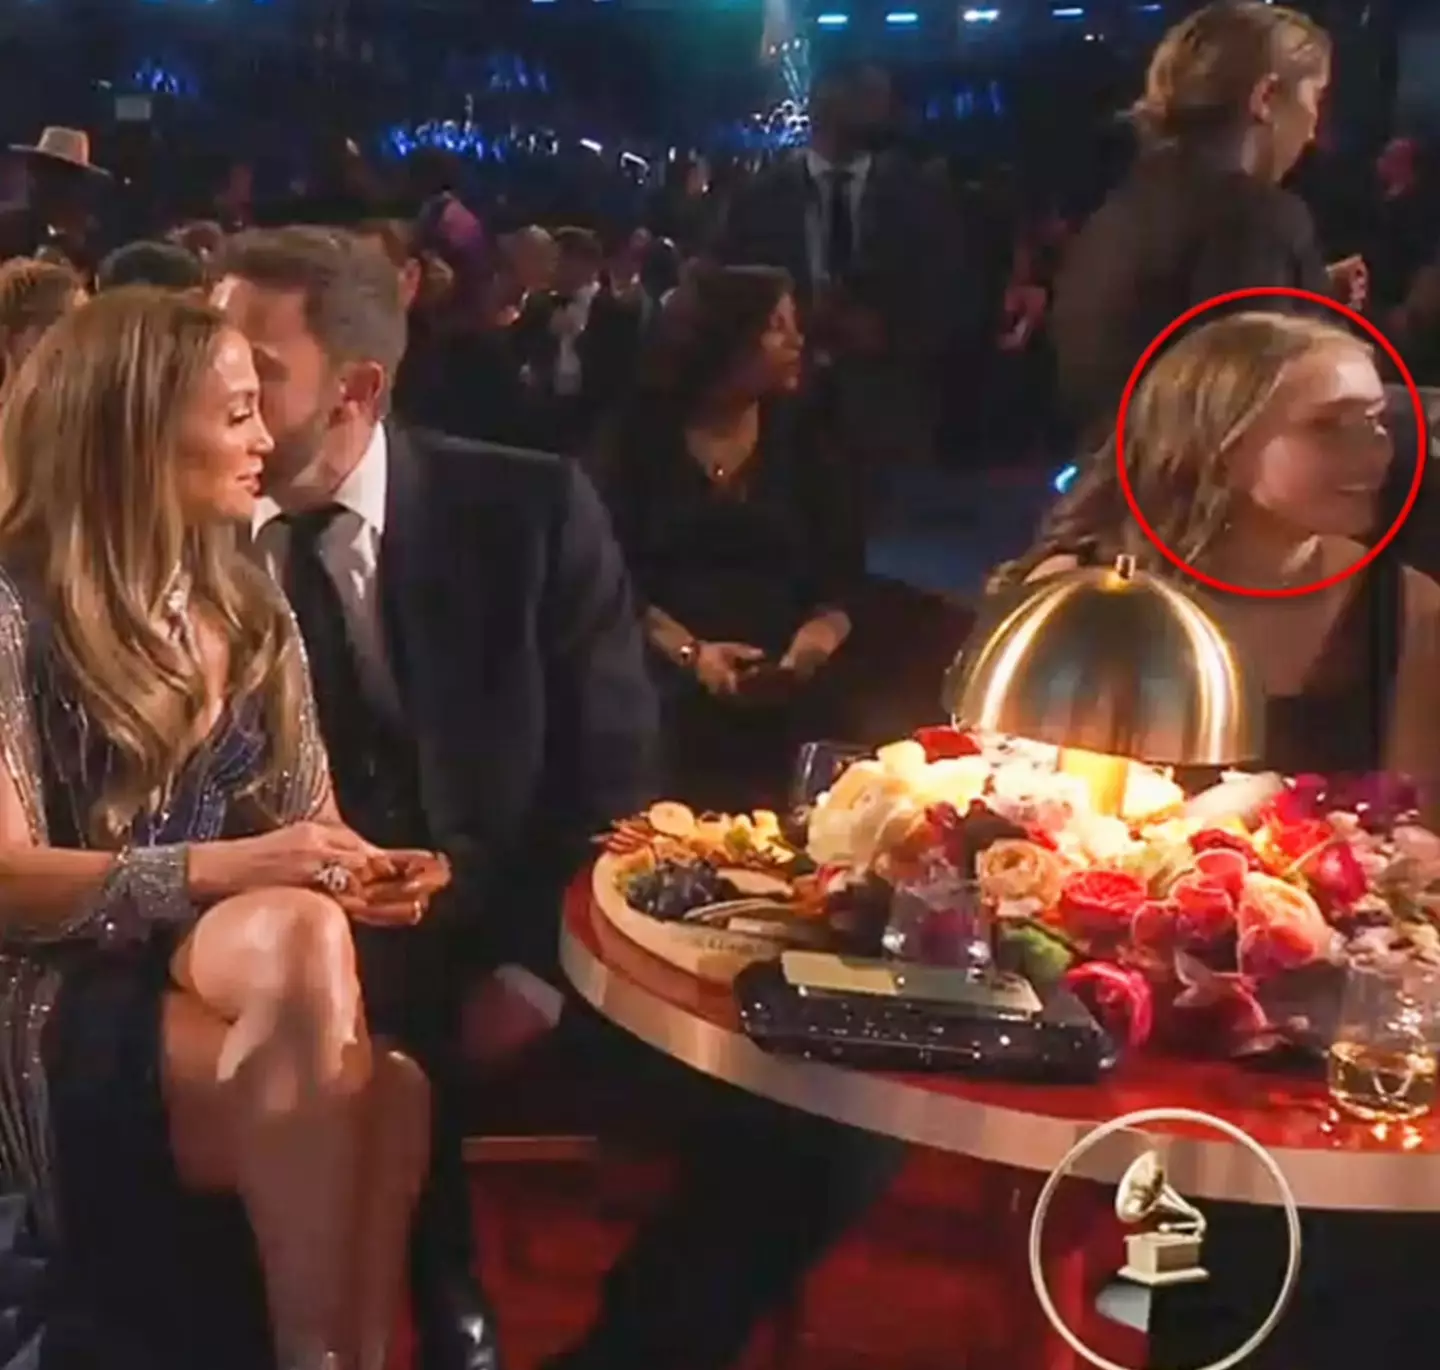 This is @almostanna sitting with the famous couple at the award ceremony.